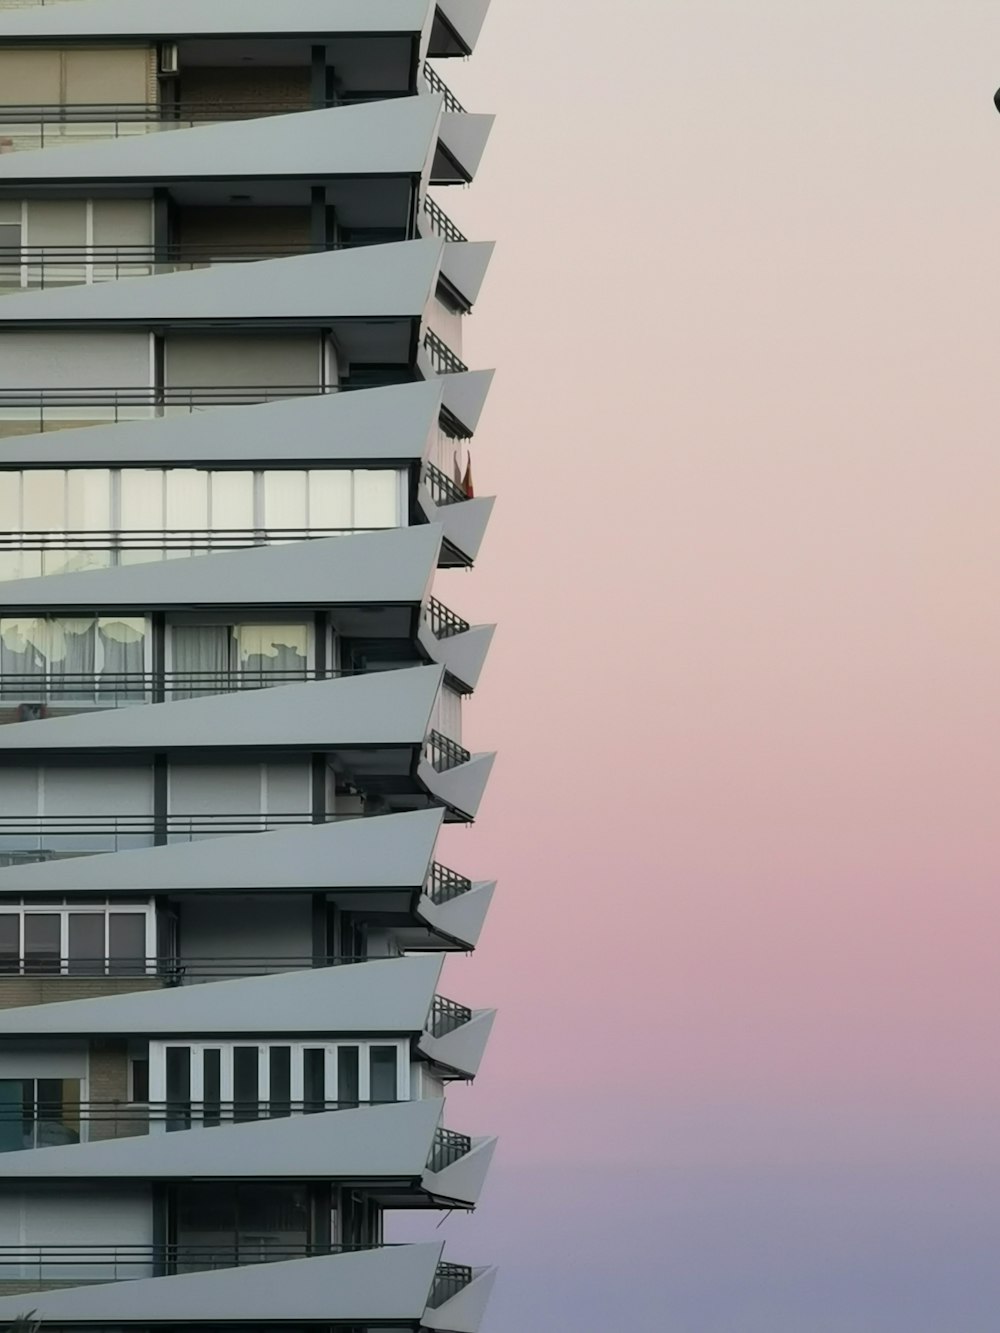 a tall building with balconies on the top of it